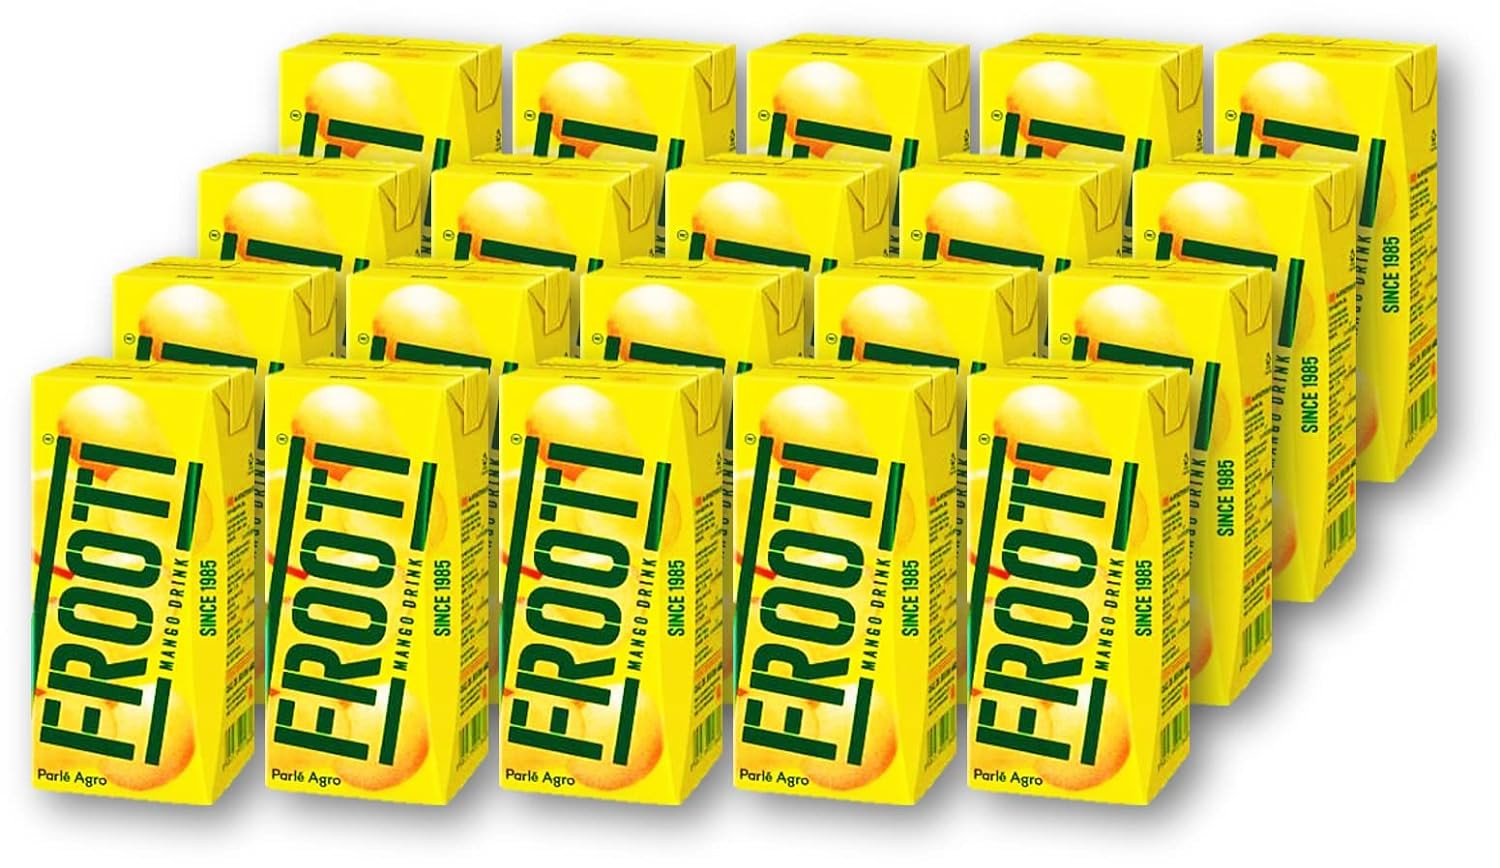 Frooti Mango Drink 150ml (Pack of 20) Unique